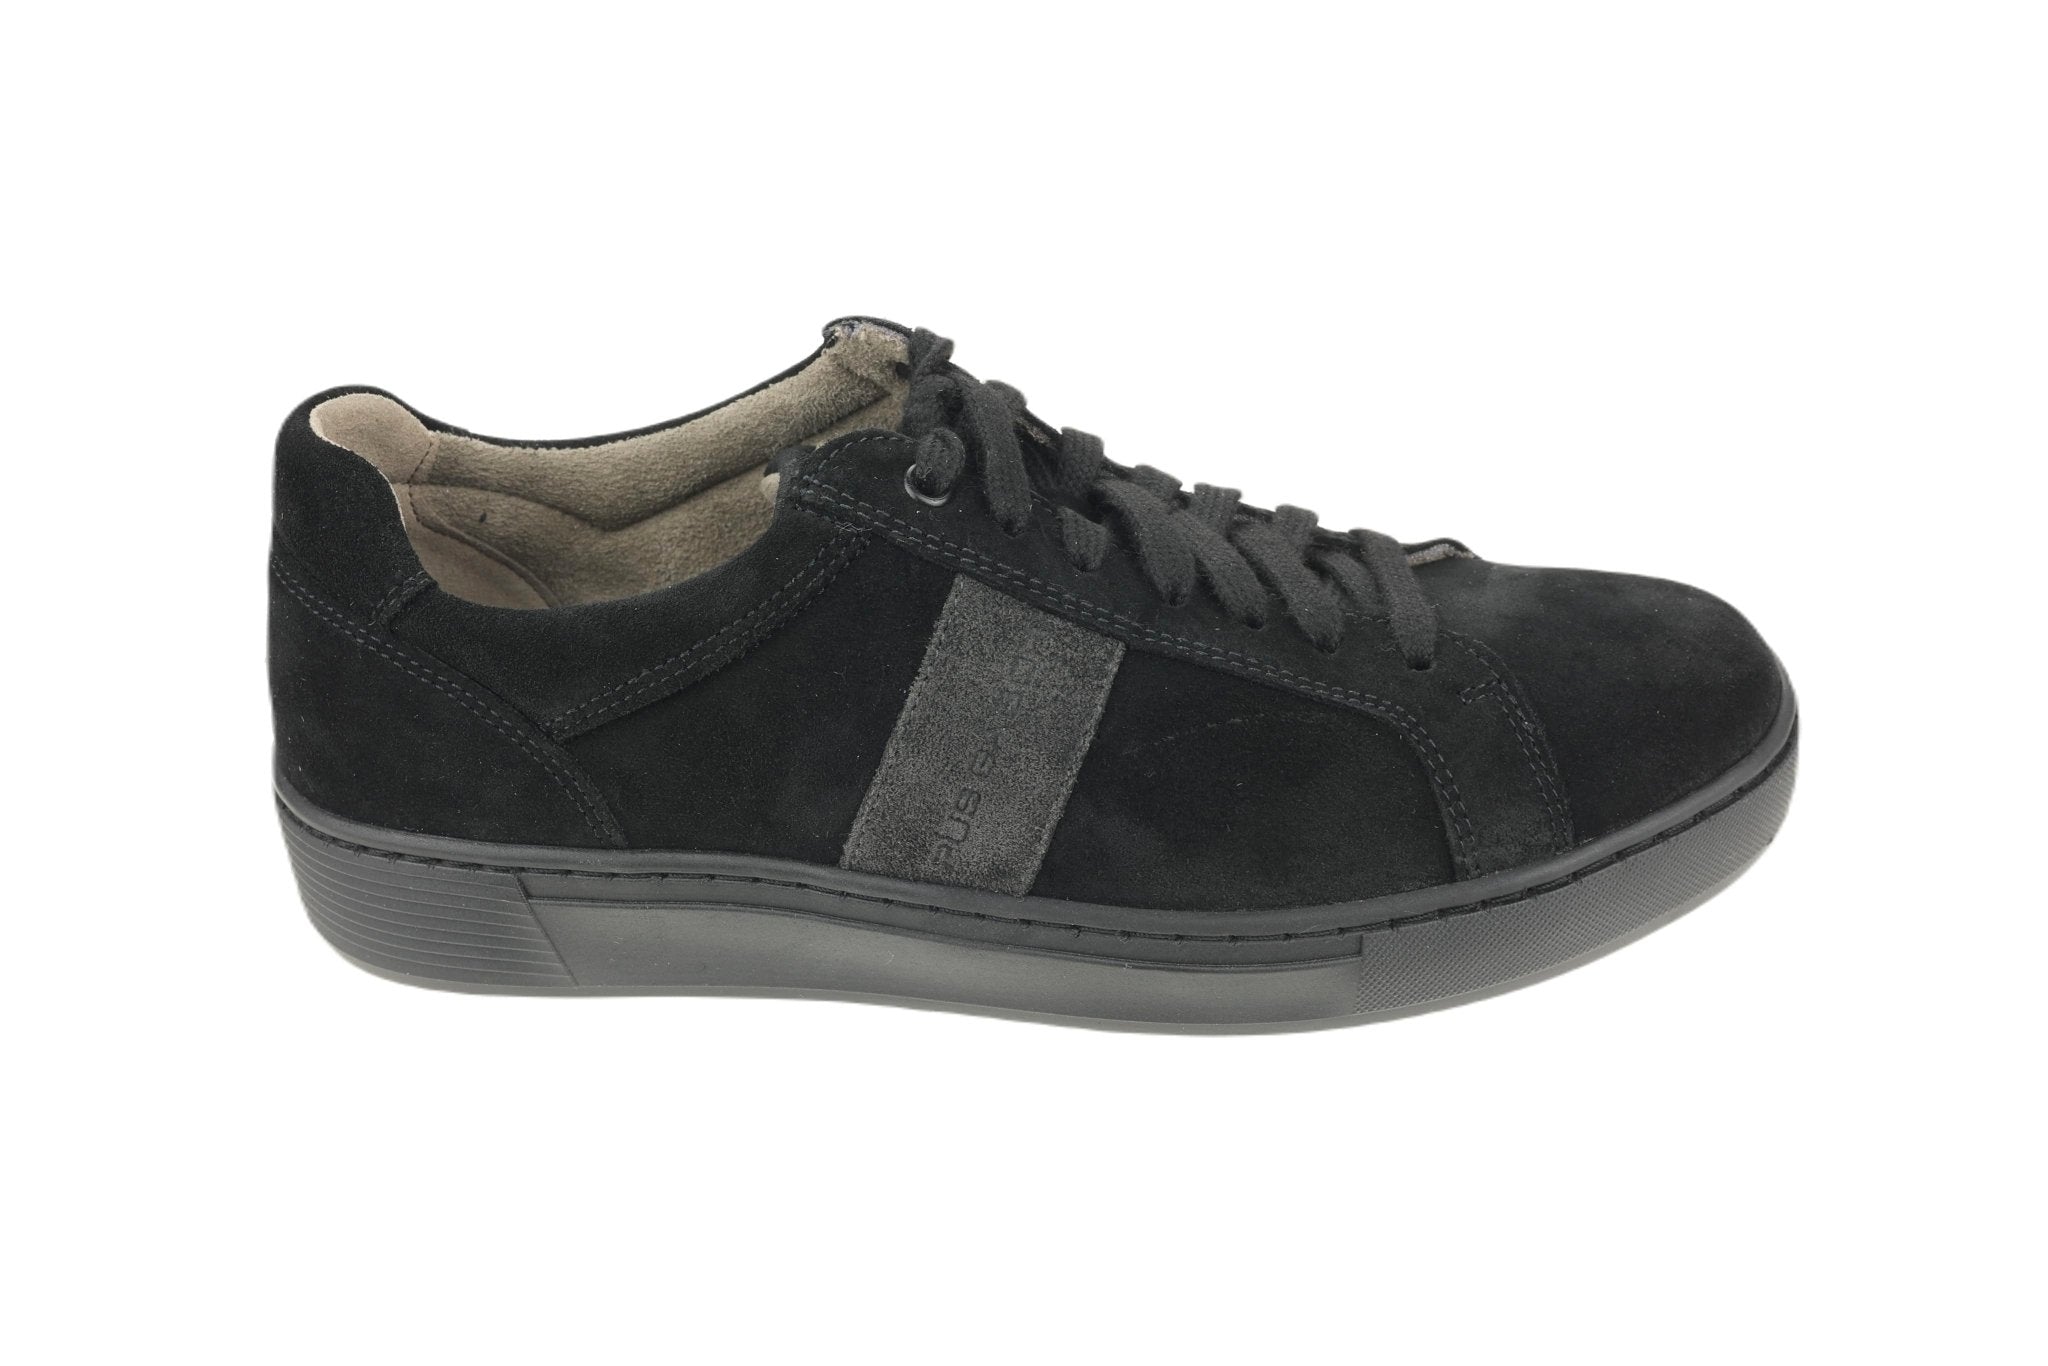 Gabor Sneakers for women online - Buy now at Boozt.com